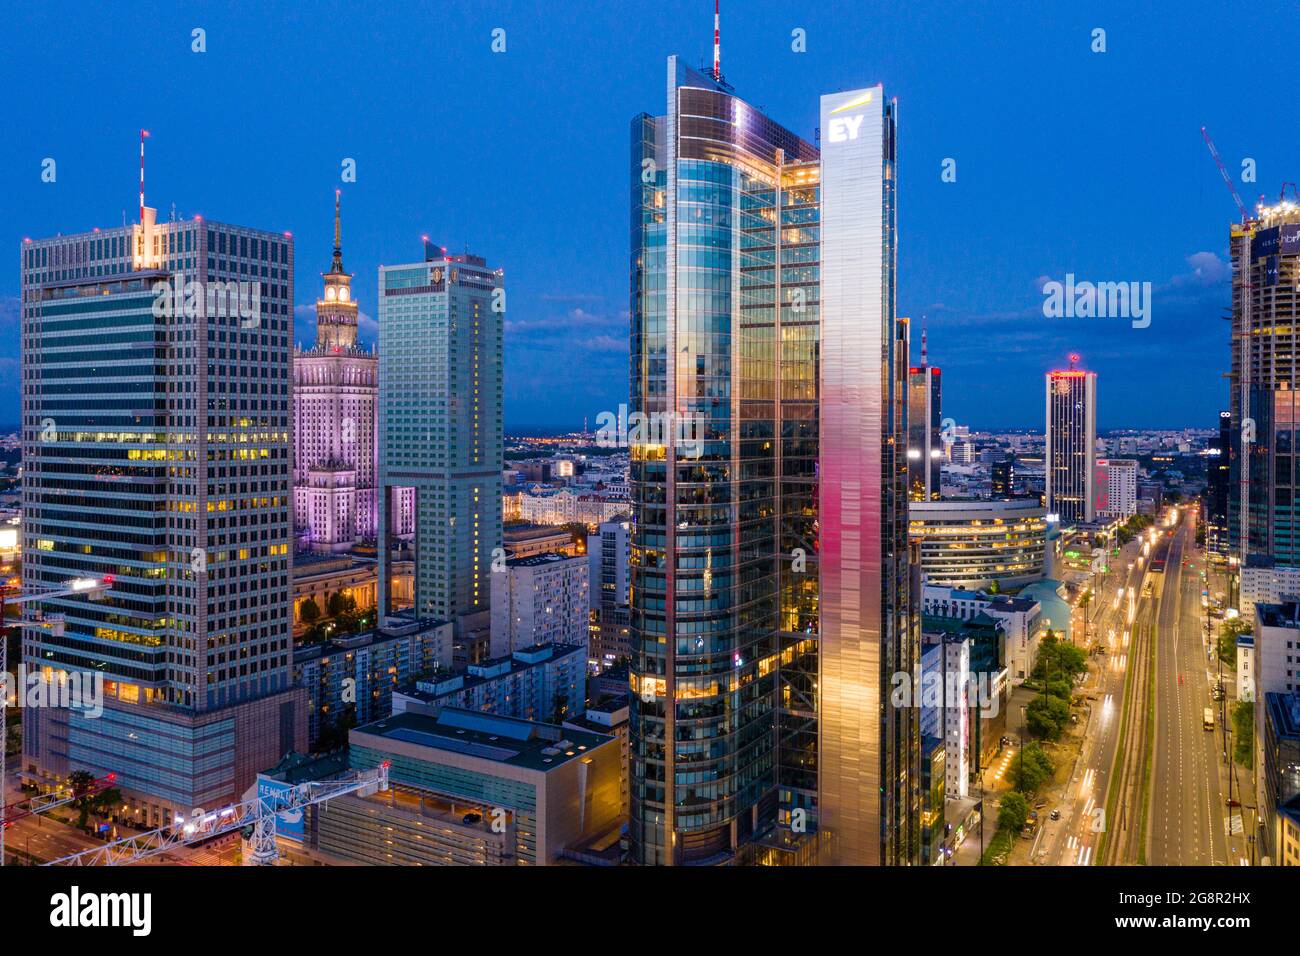 Aerial view of Warsaw city center at dusk Stock Photo